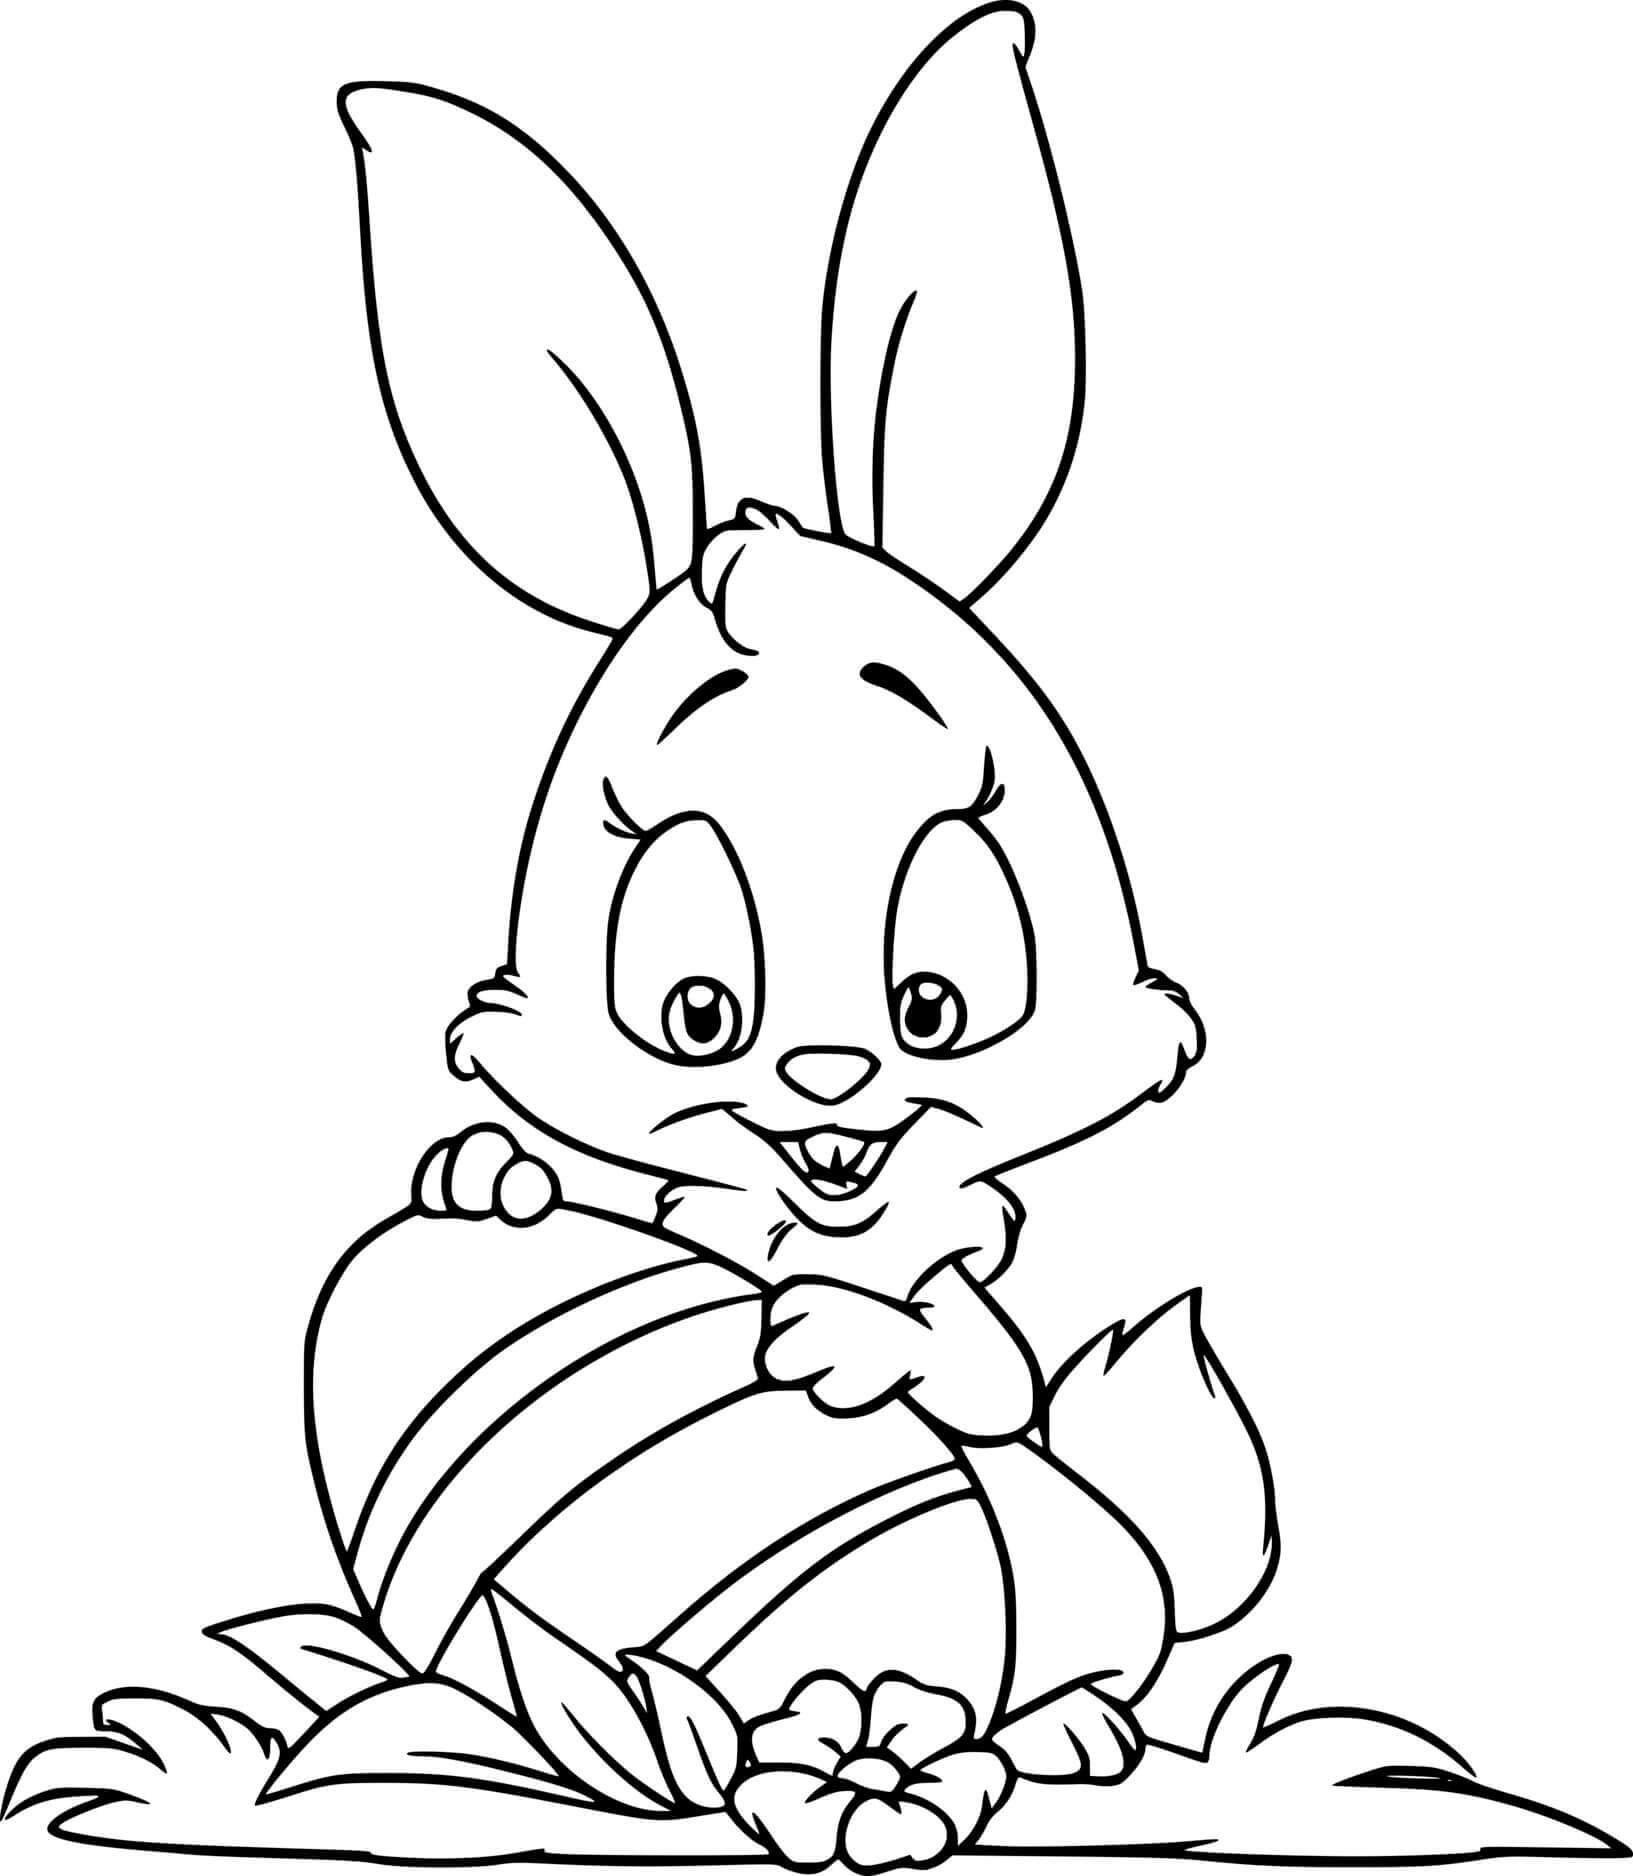 Bunny Found An Easter Egg Coloring Page